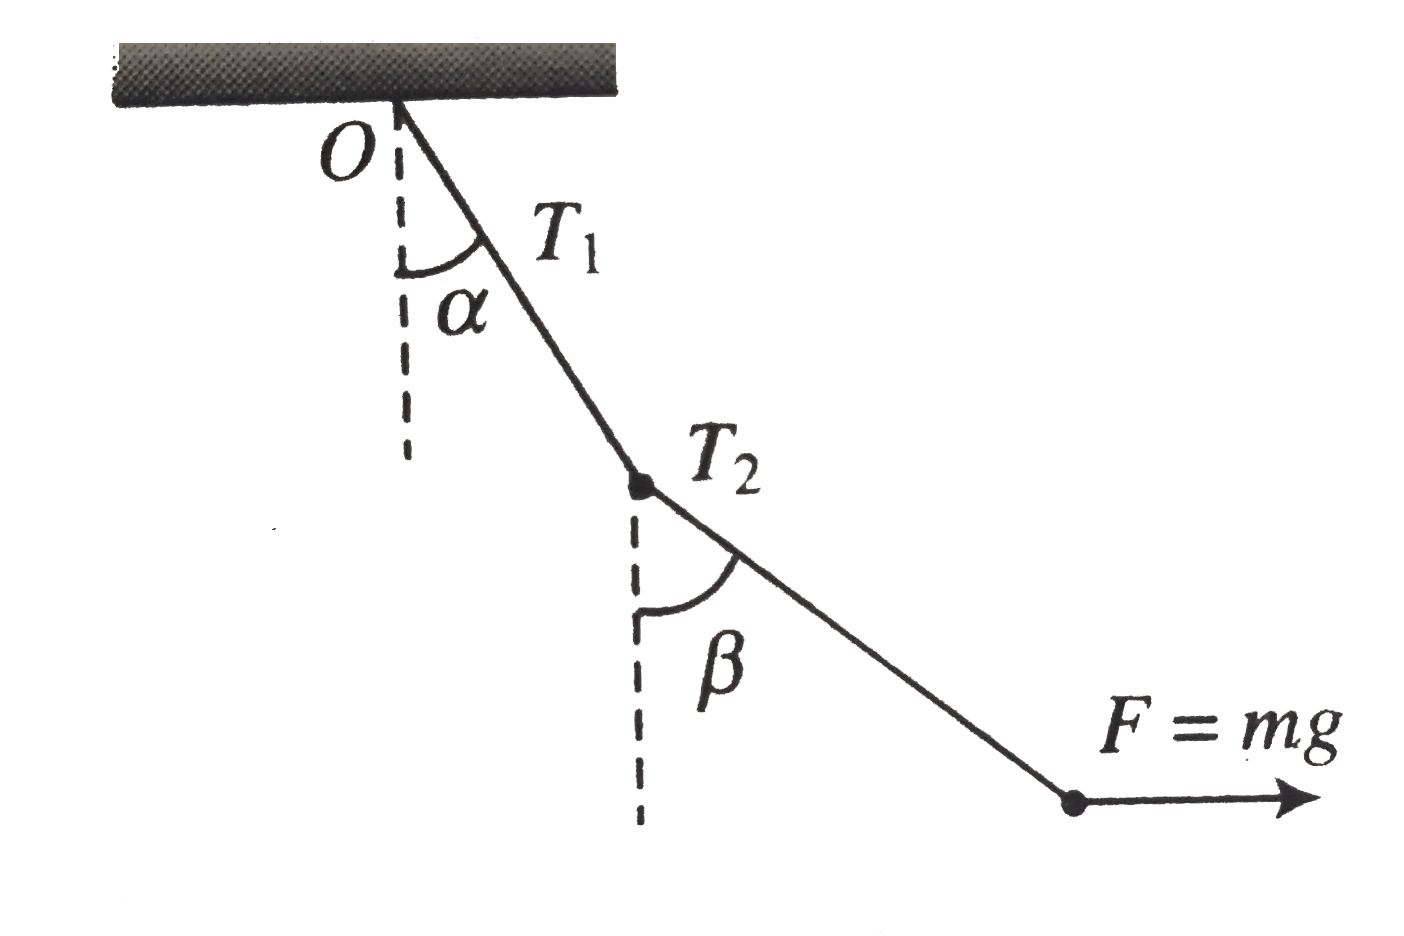 Two particles A and B, each of mass m, are kept stationary by appyling a horizontal force F=mg on particle B as shown in fig.